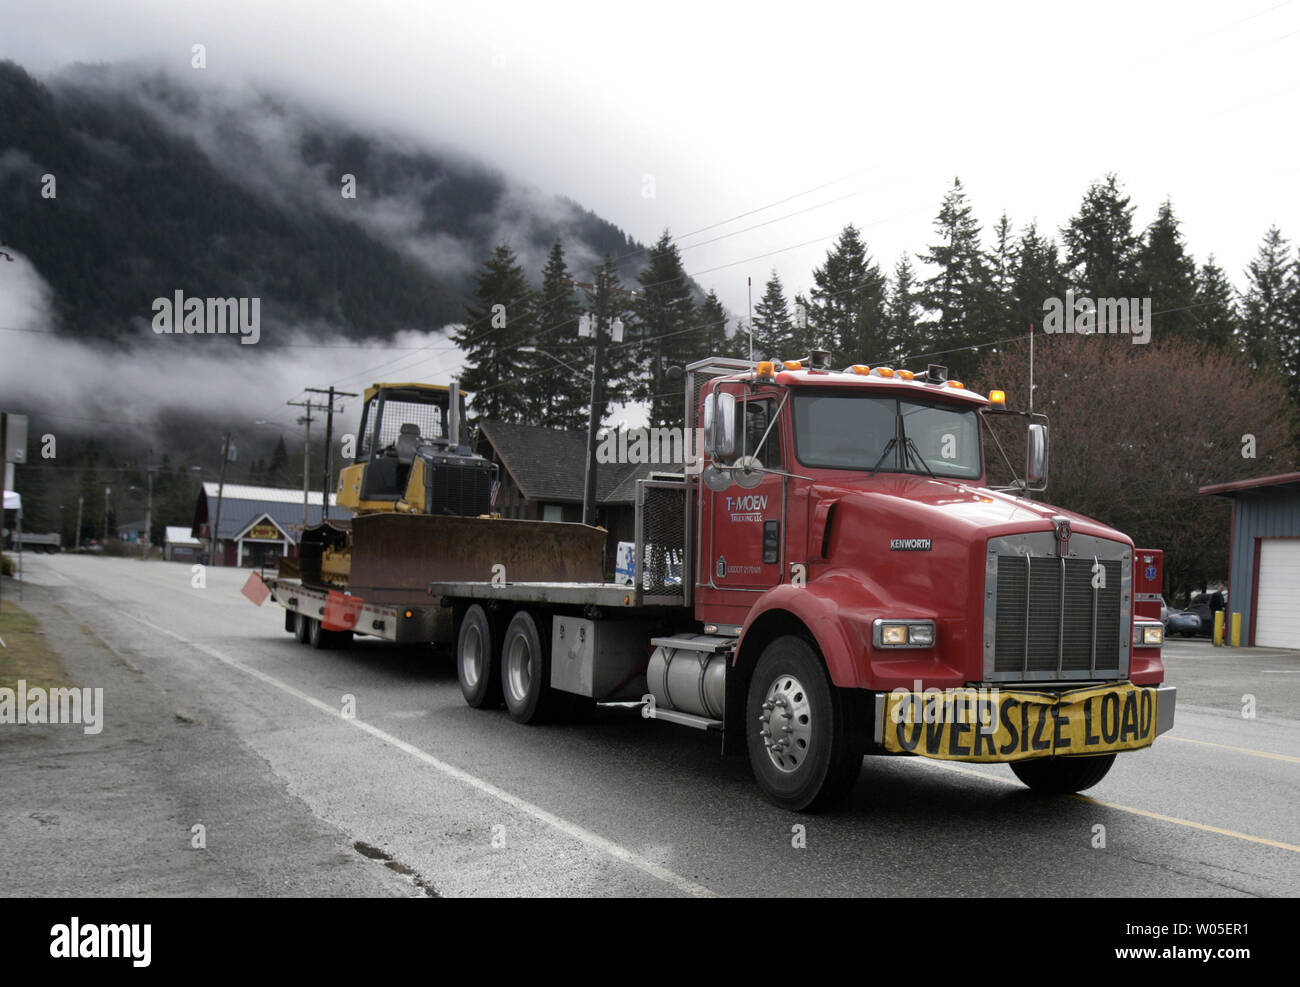 Heavy equipment is transported down Hwy 320 that will be used in search and rescue efforts in Darrington, Washington on March 27, 2014. Rescue efforts continue in the aftermath of Saturday's mudslide that buried the nearby town of Oso.  Some 25 bodies have been discovered with more than 90 missing from the tragic mudslide.  UPI/Jim Bryant Stock Photo